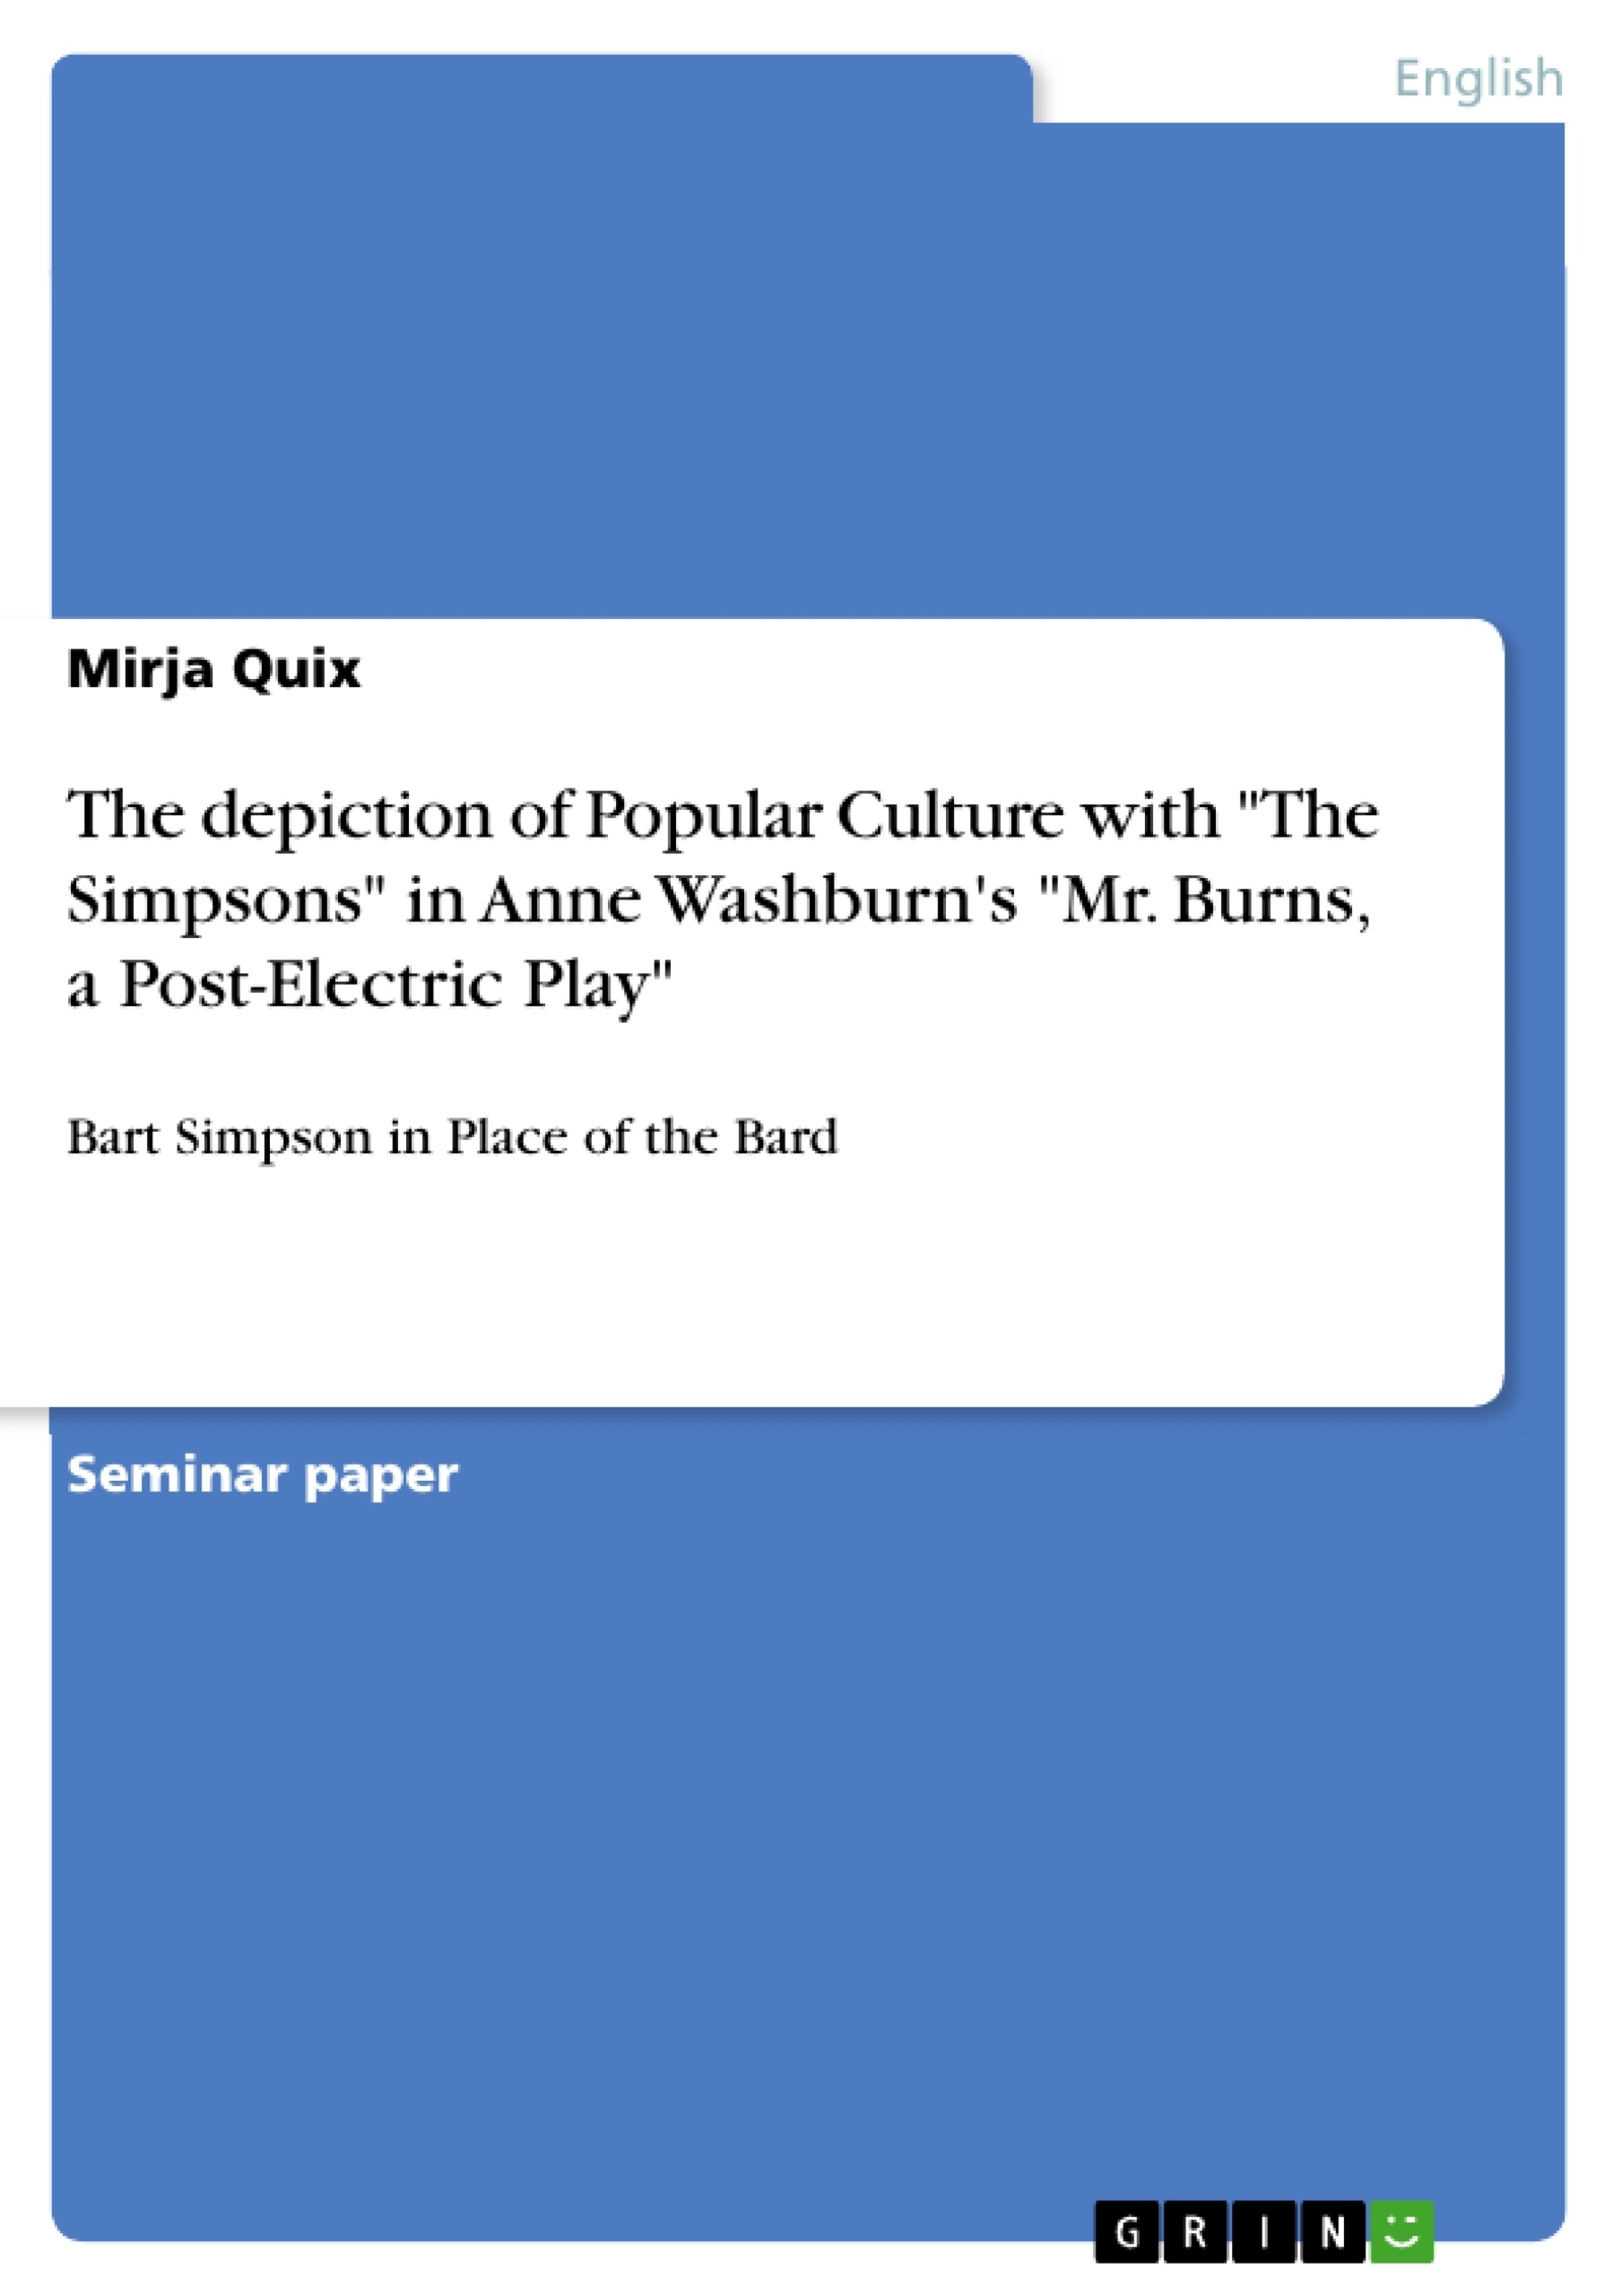 Titre: The depiction of Popular Culture with "The Simpsons" in Anne Washburn's "Mr. Burns, a Post-Electric Play"